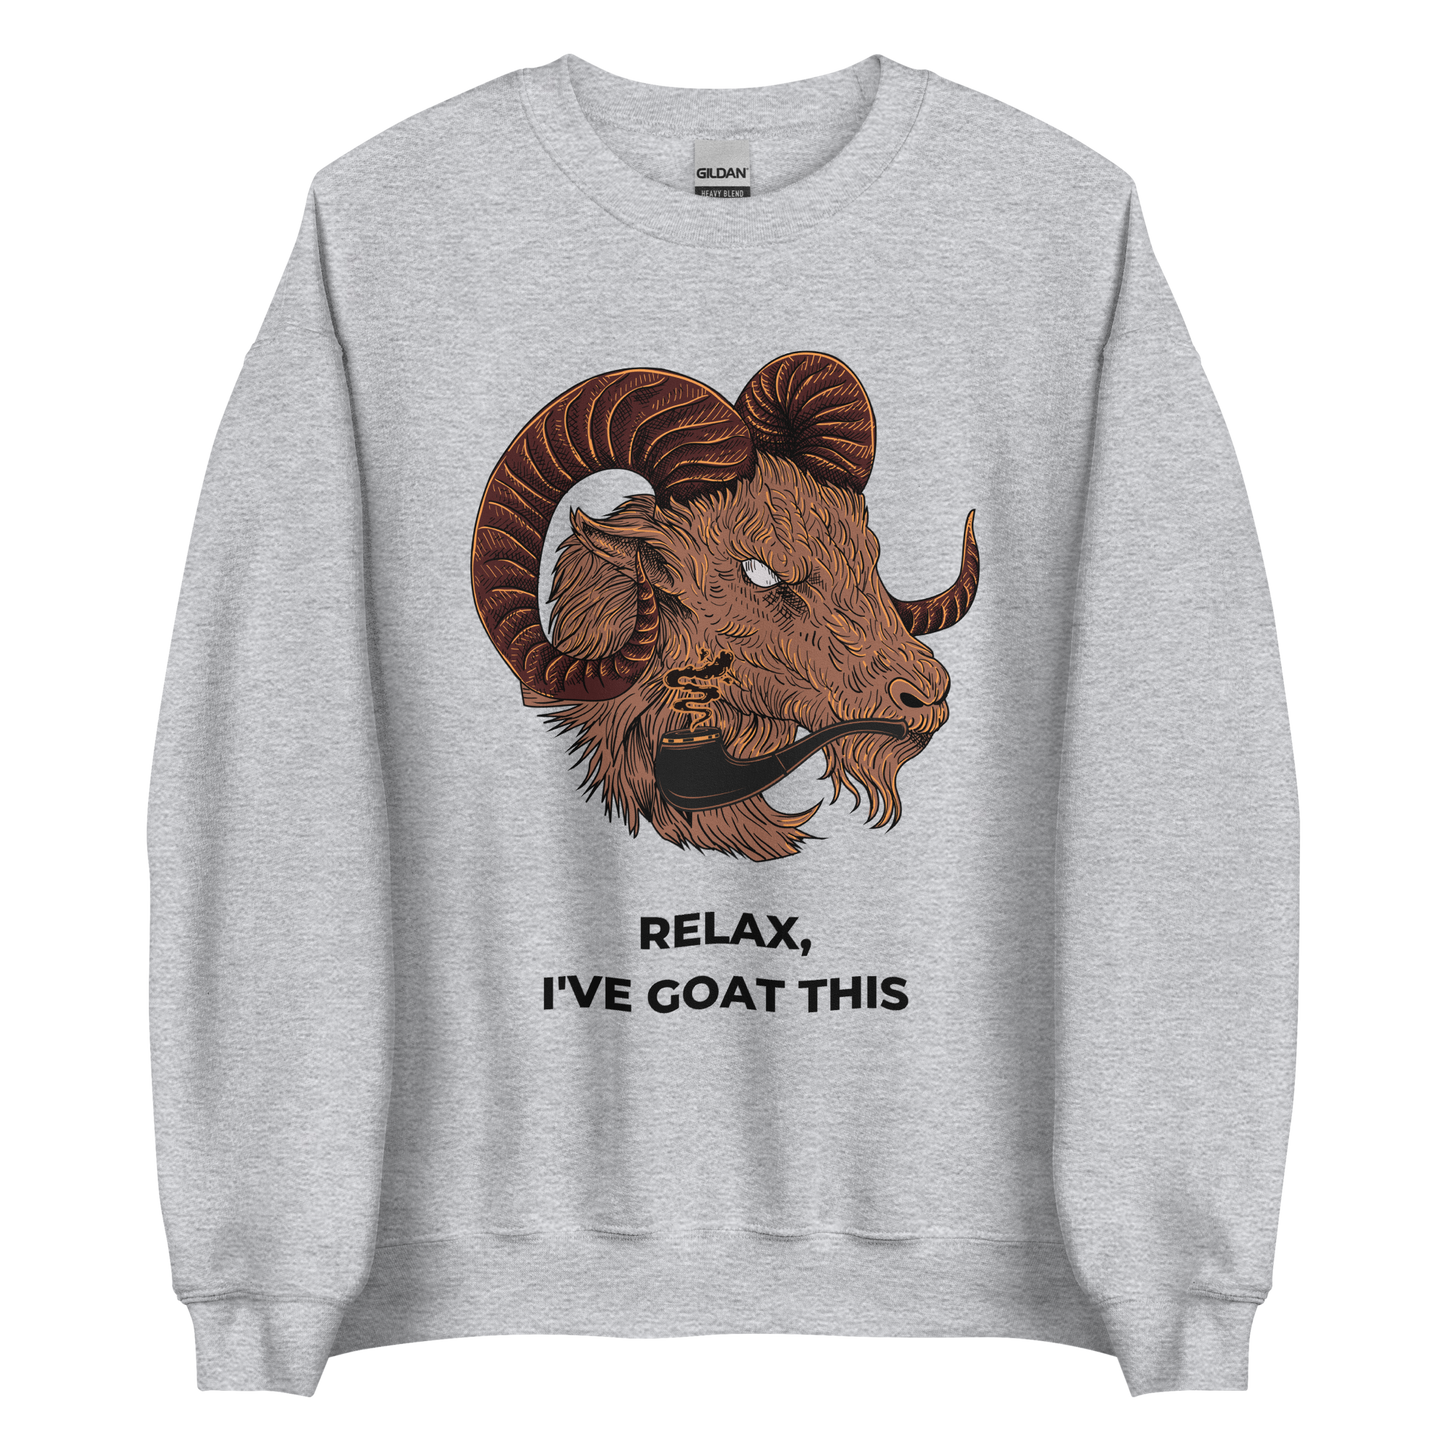 Sport Grey Goat Sweatshirt featuring a fierce Relax I've Goat This graphic on the chest - Funny Graphic Goat Sweatshirts - Boozy Fox